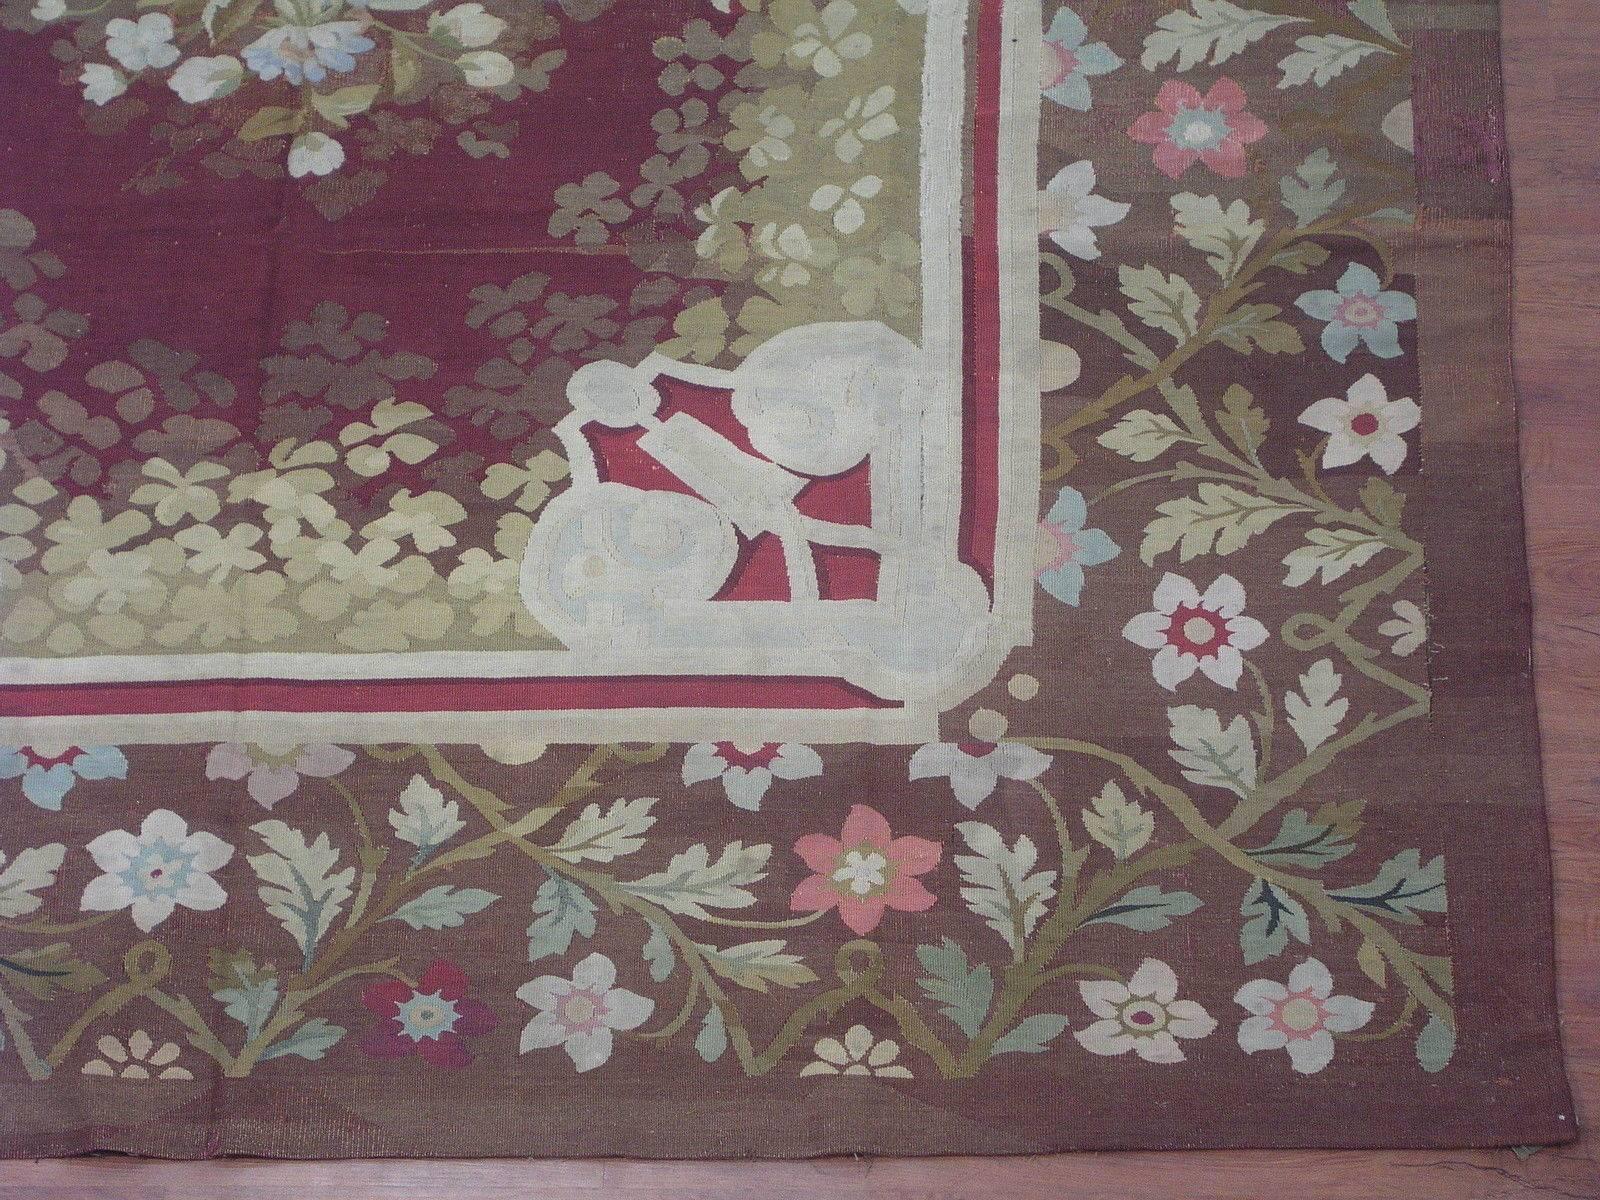 Antique French Aubusson Rug with Floral Design, circa 1880 In Good Condition For Sale In Northridge, CA